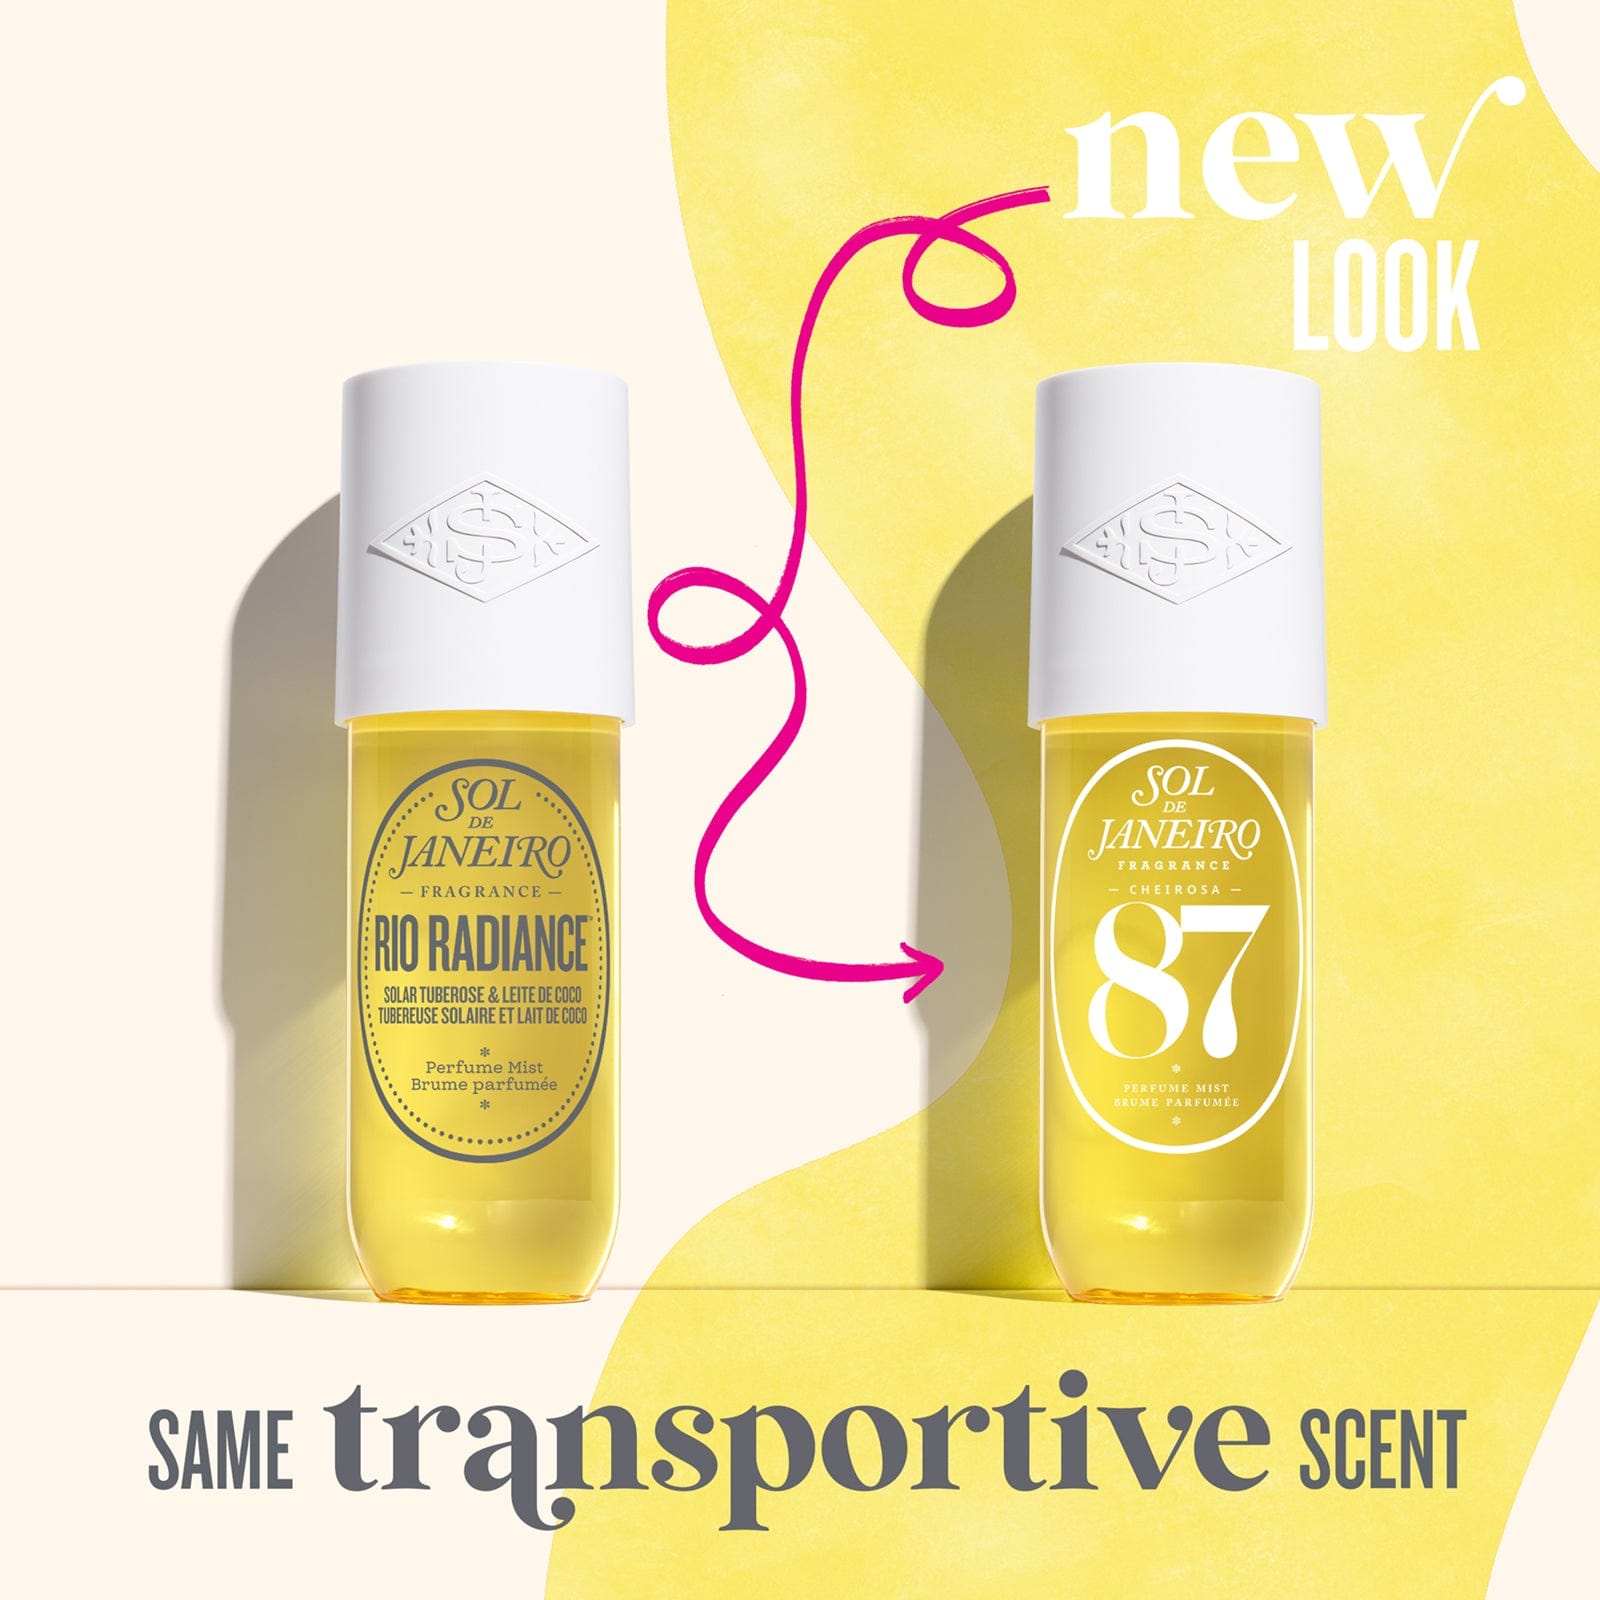 New Look - same transportive scent